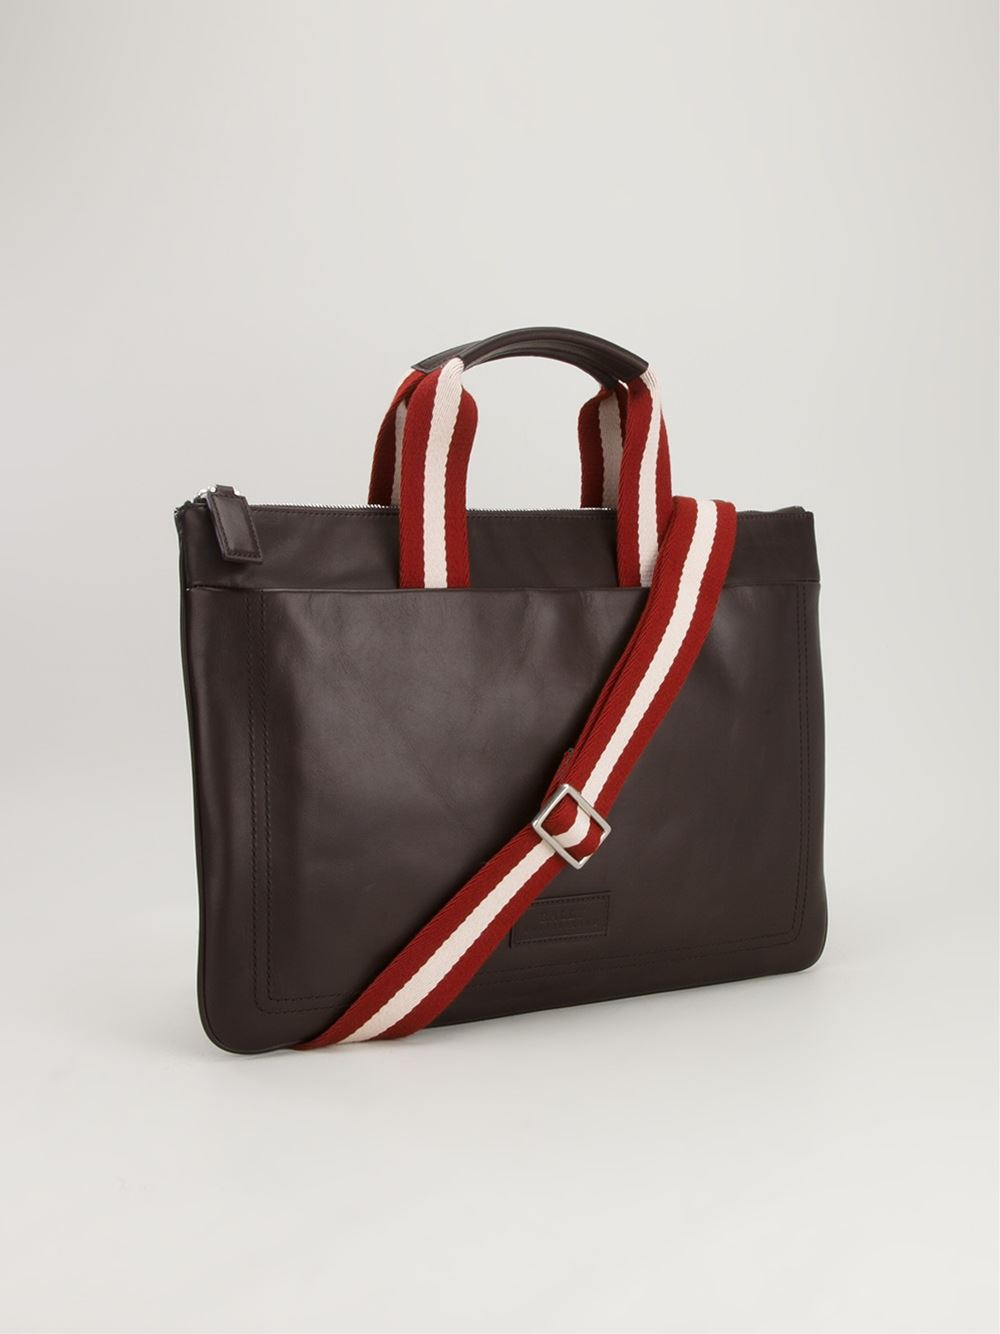 Lyst - Bally Leather Tote Bag in Brown for Men